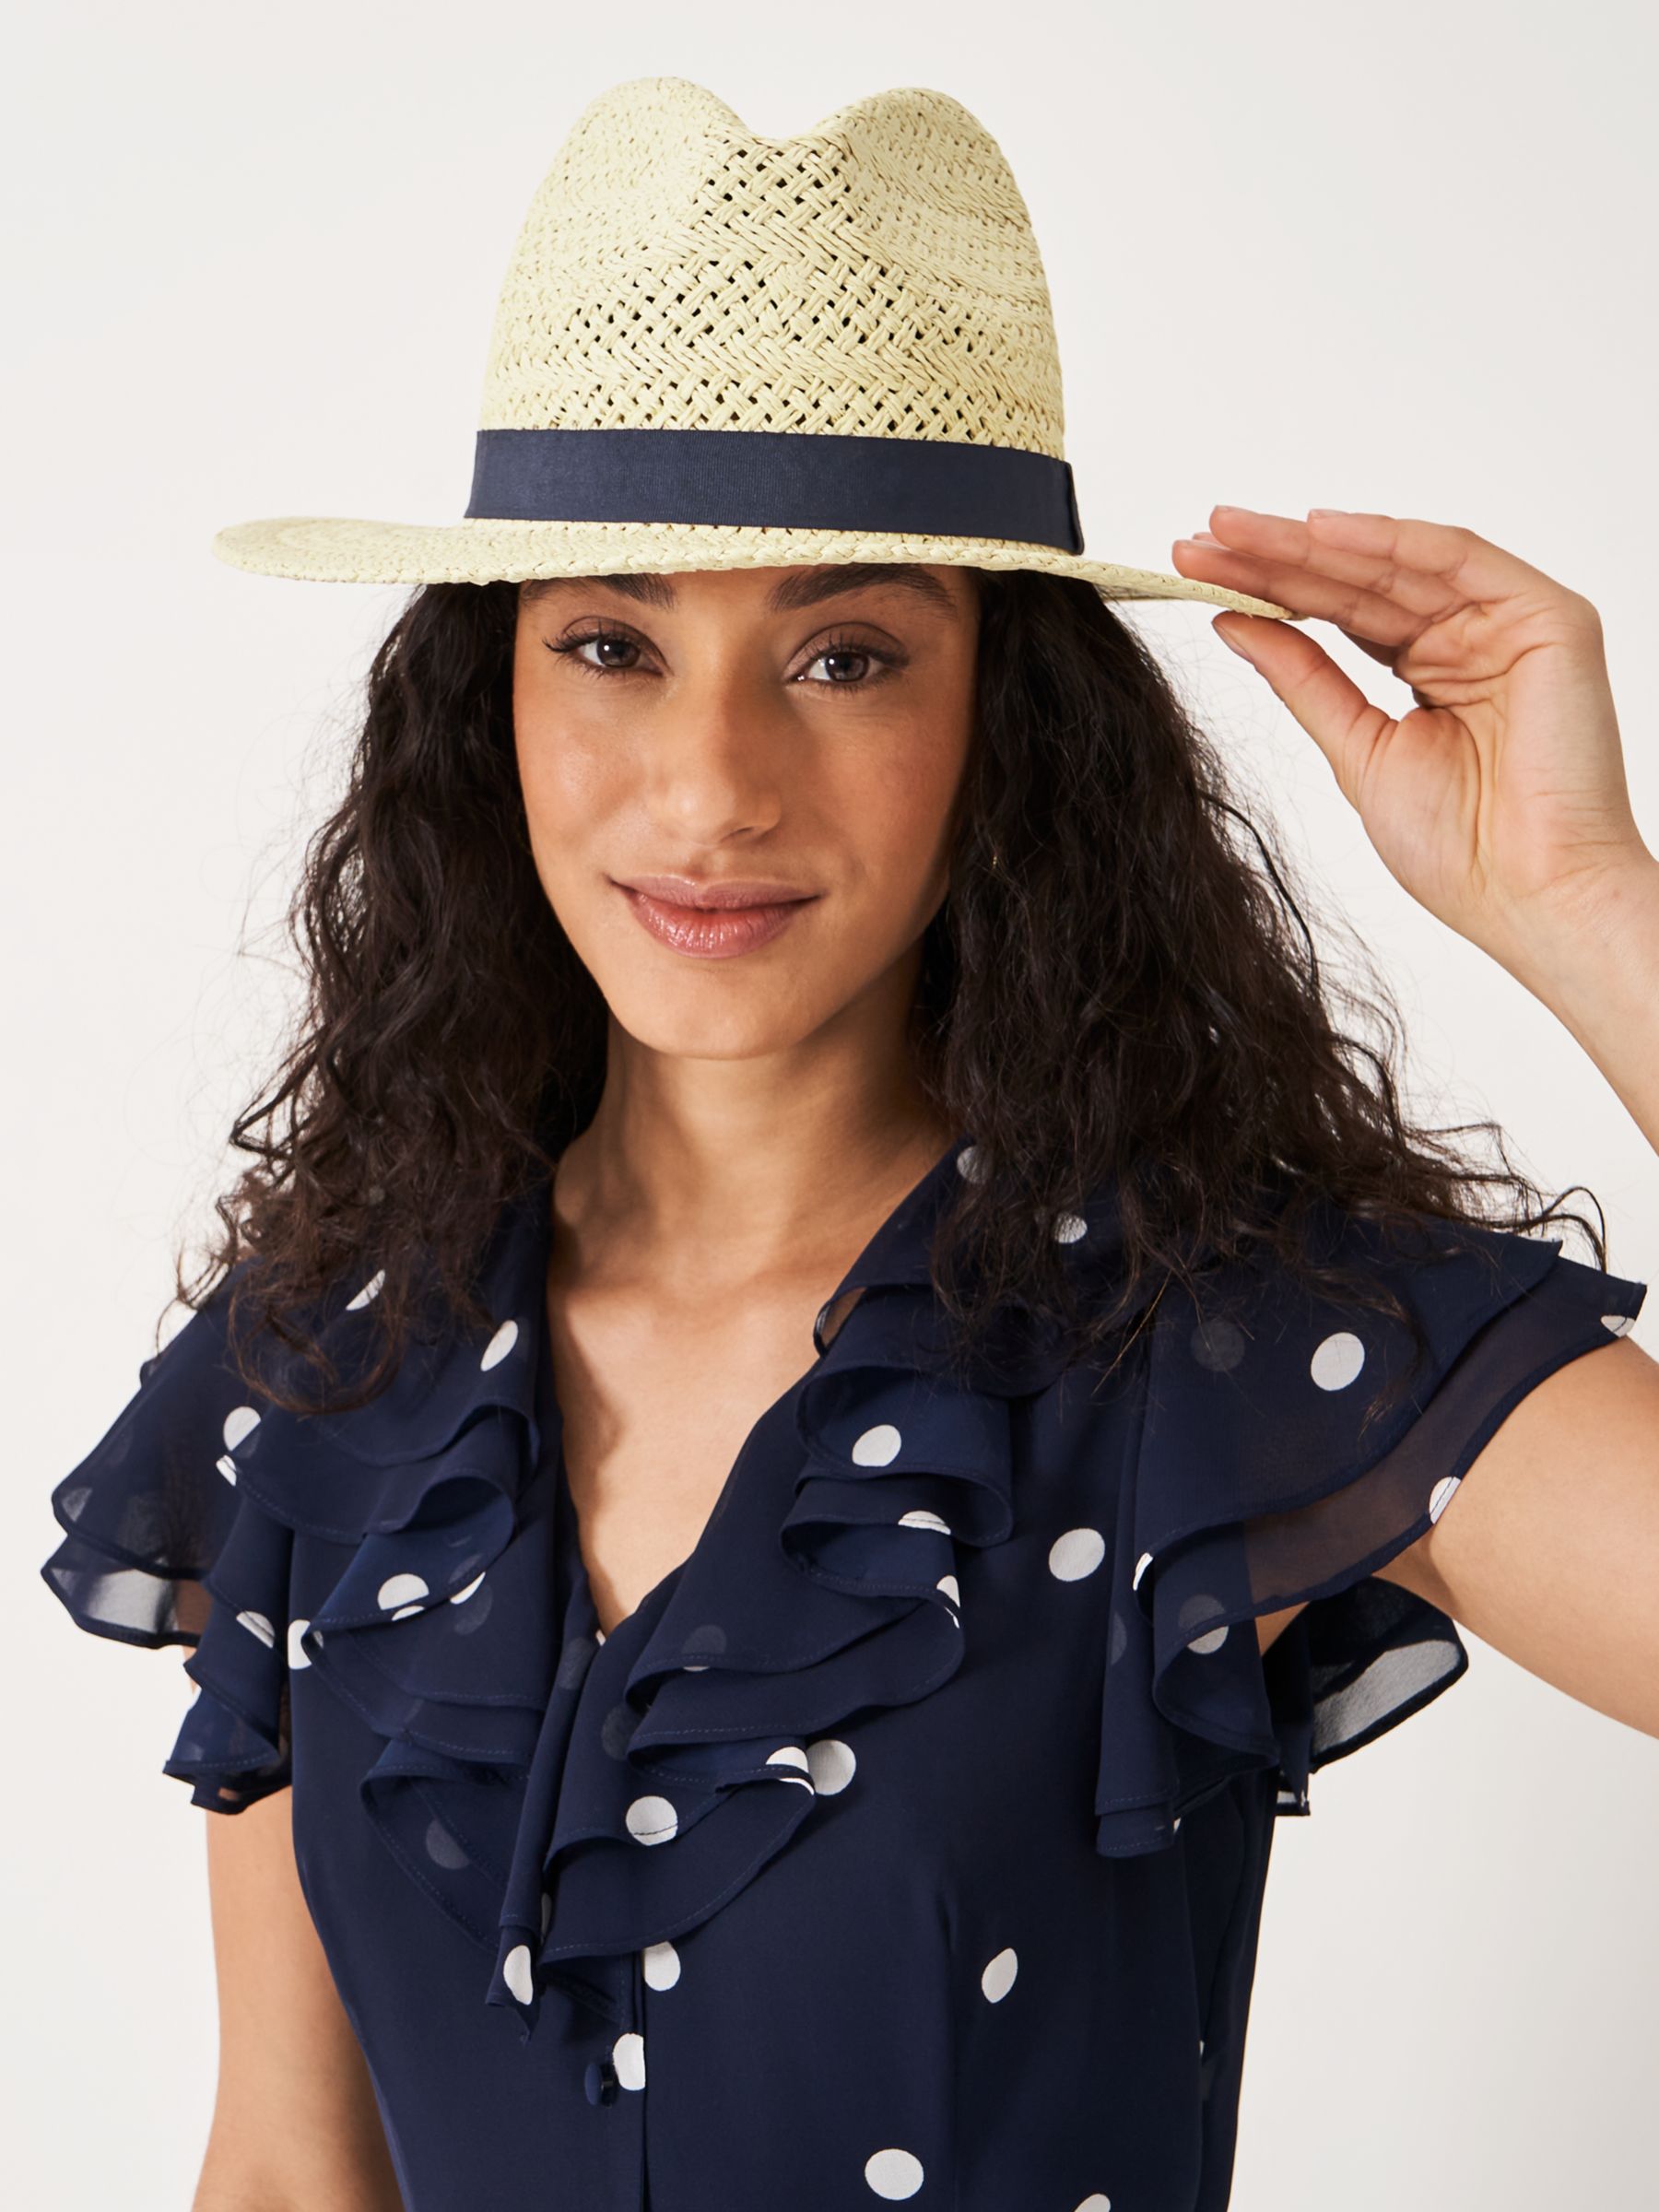 Crew Clothing Woven Trilby Hat, Neutral/Navy, One Size